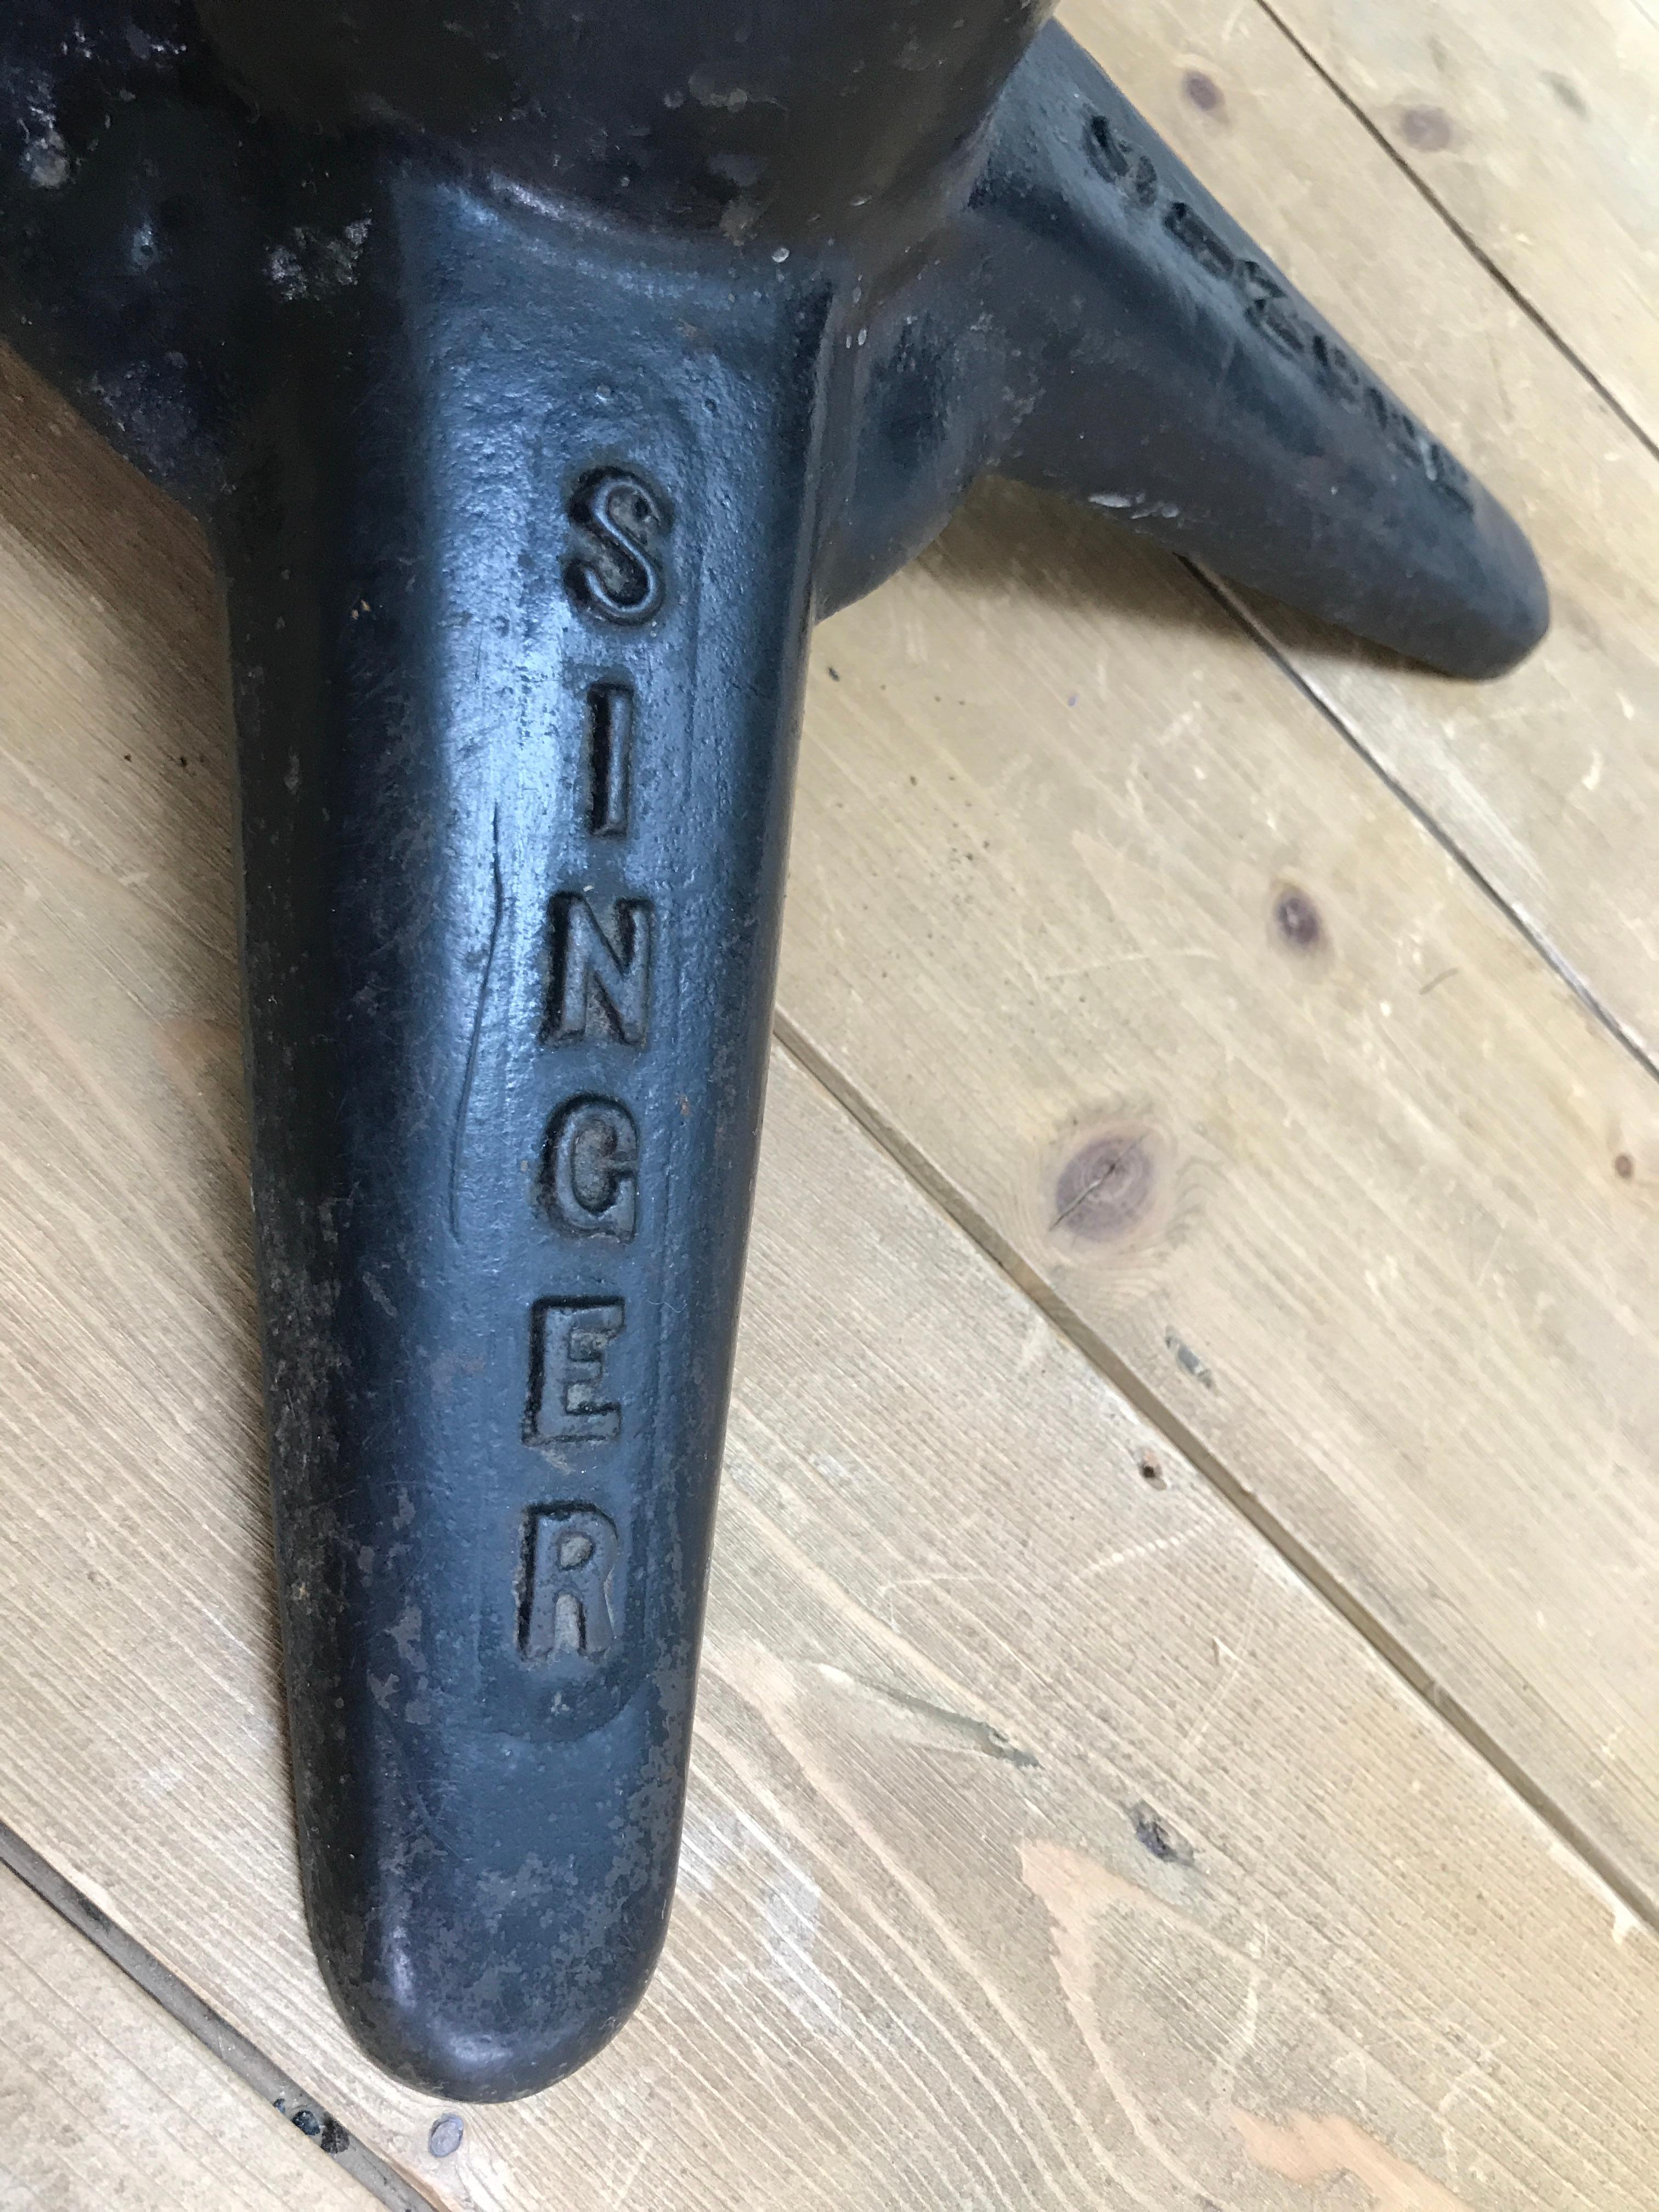 American Exceptional Quality Singer Industrial Stool with Back Rest Original Condition